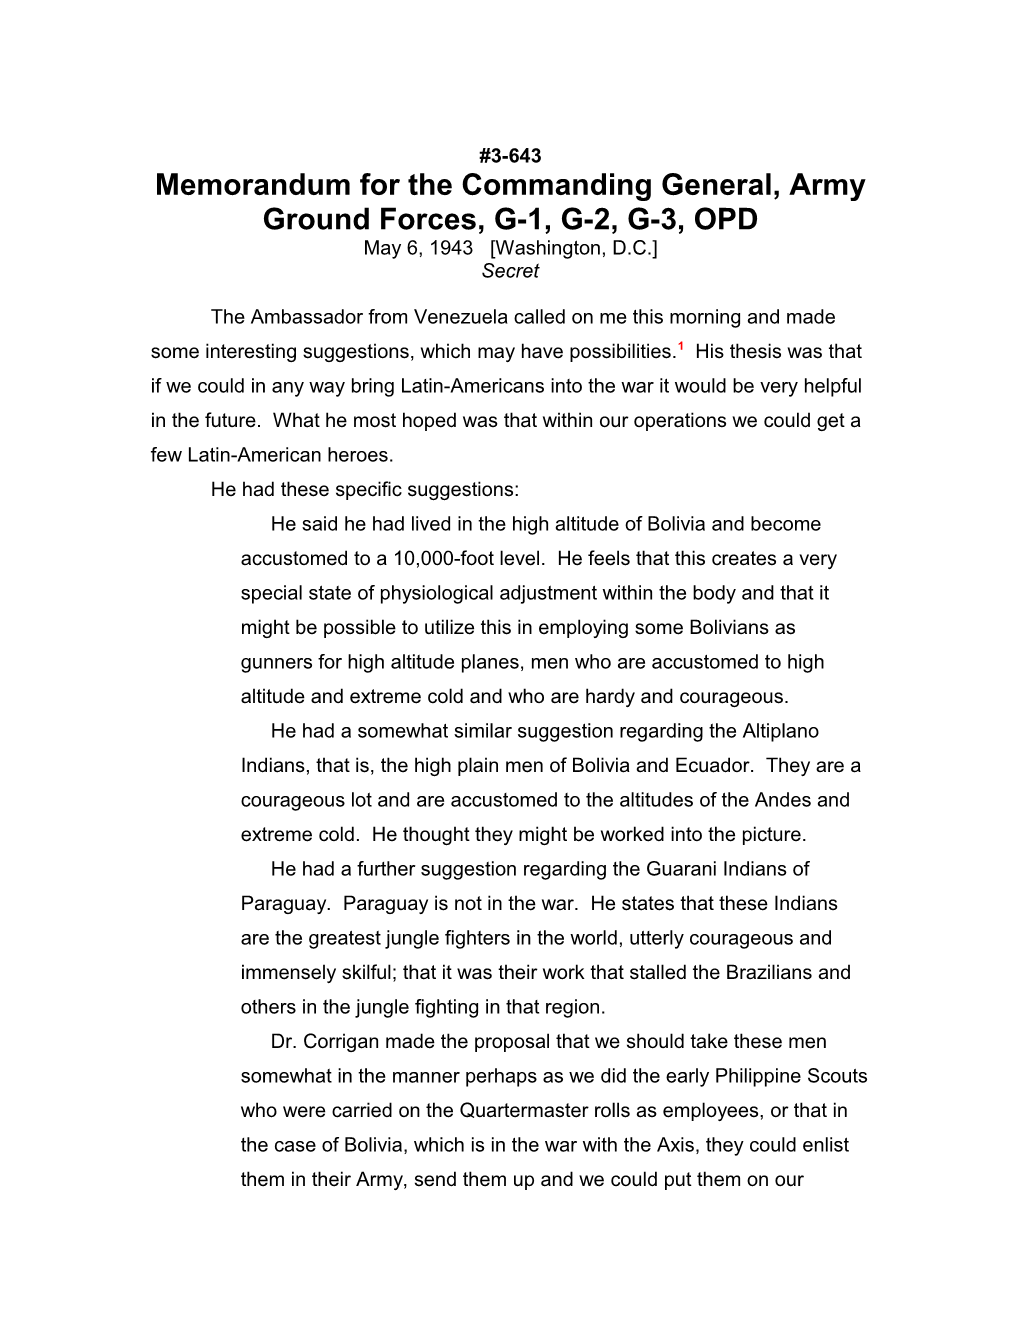 Memorandum for the Commanding General, Army Ground Forces, G-1, G-2, G-3, OPD